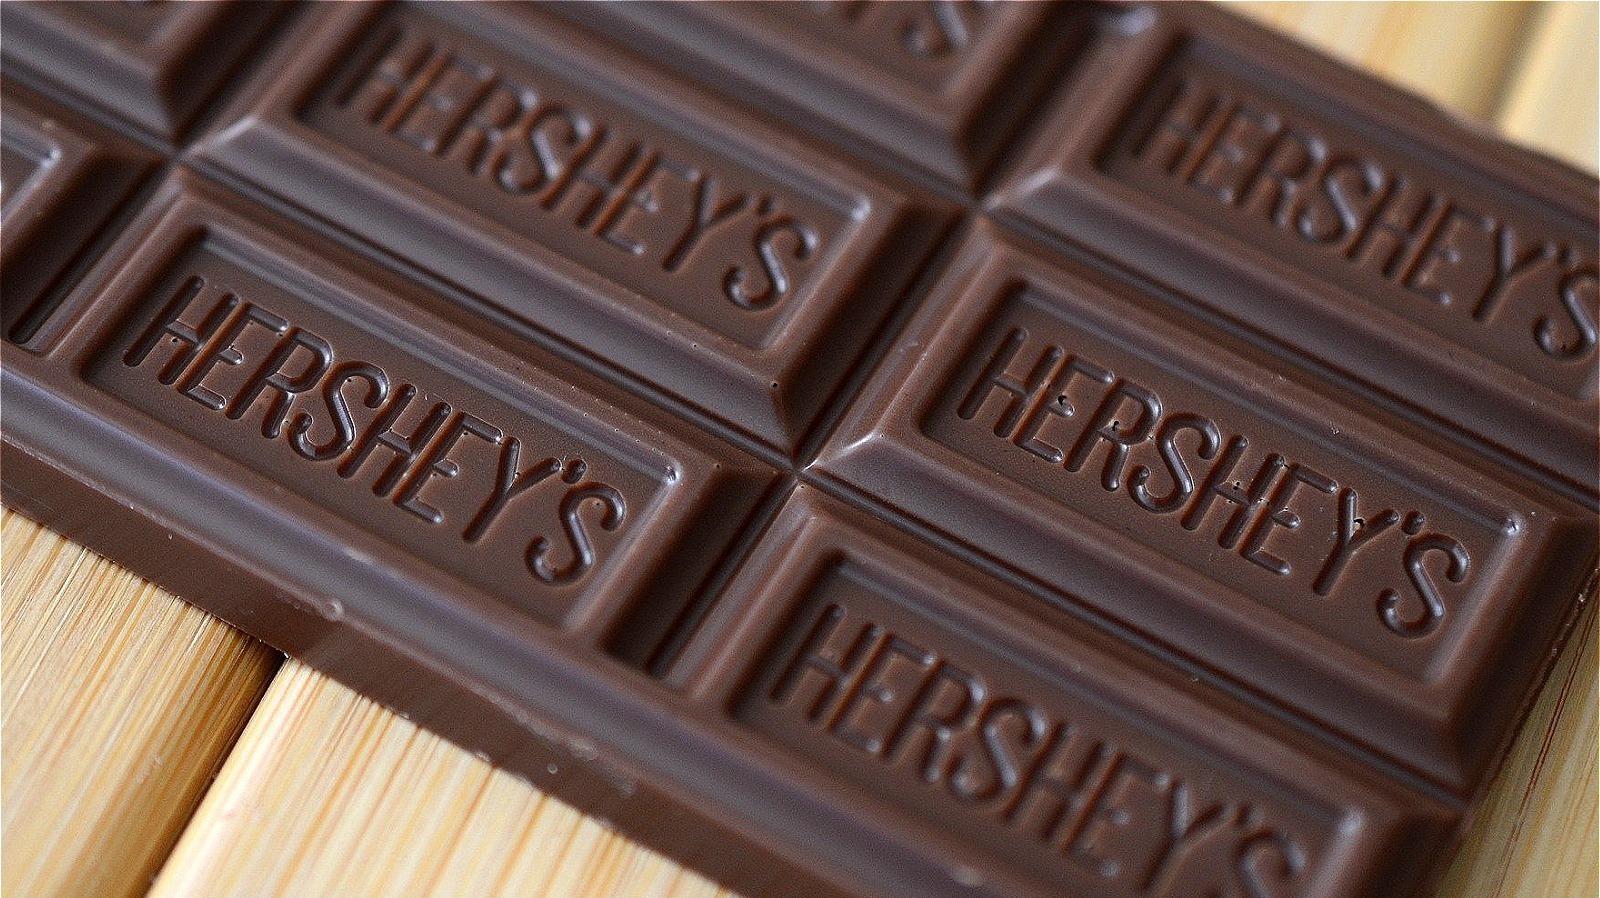 Hershey's New Contest Comes With The Ultimate Hallmark Movie Prize